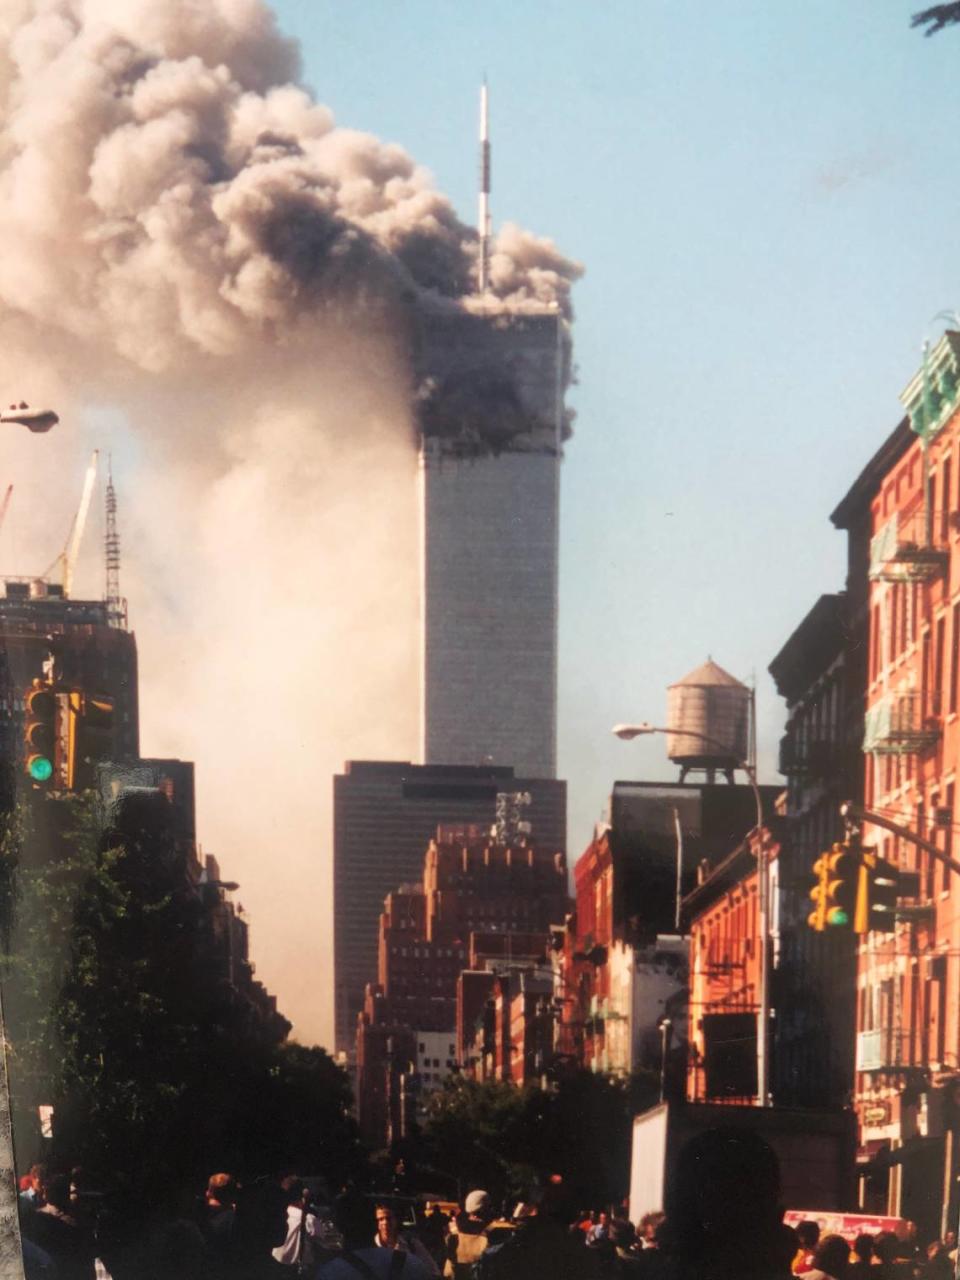 Kevin Larsh was gathered around a nearby car with other New Yorkers, listening to radio reports when the South tower fell.